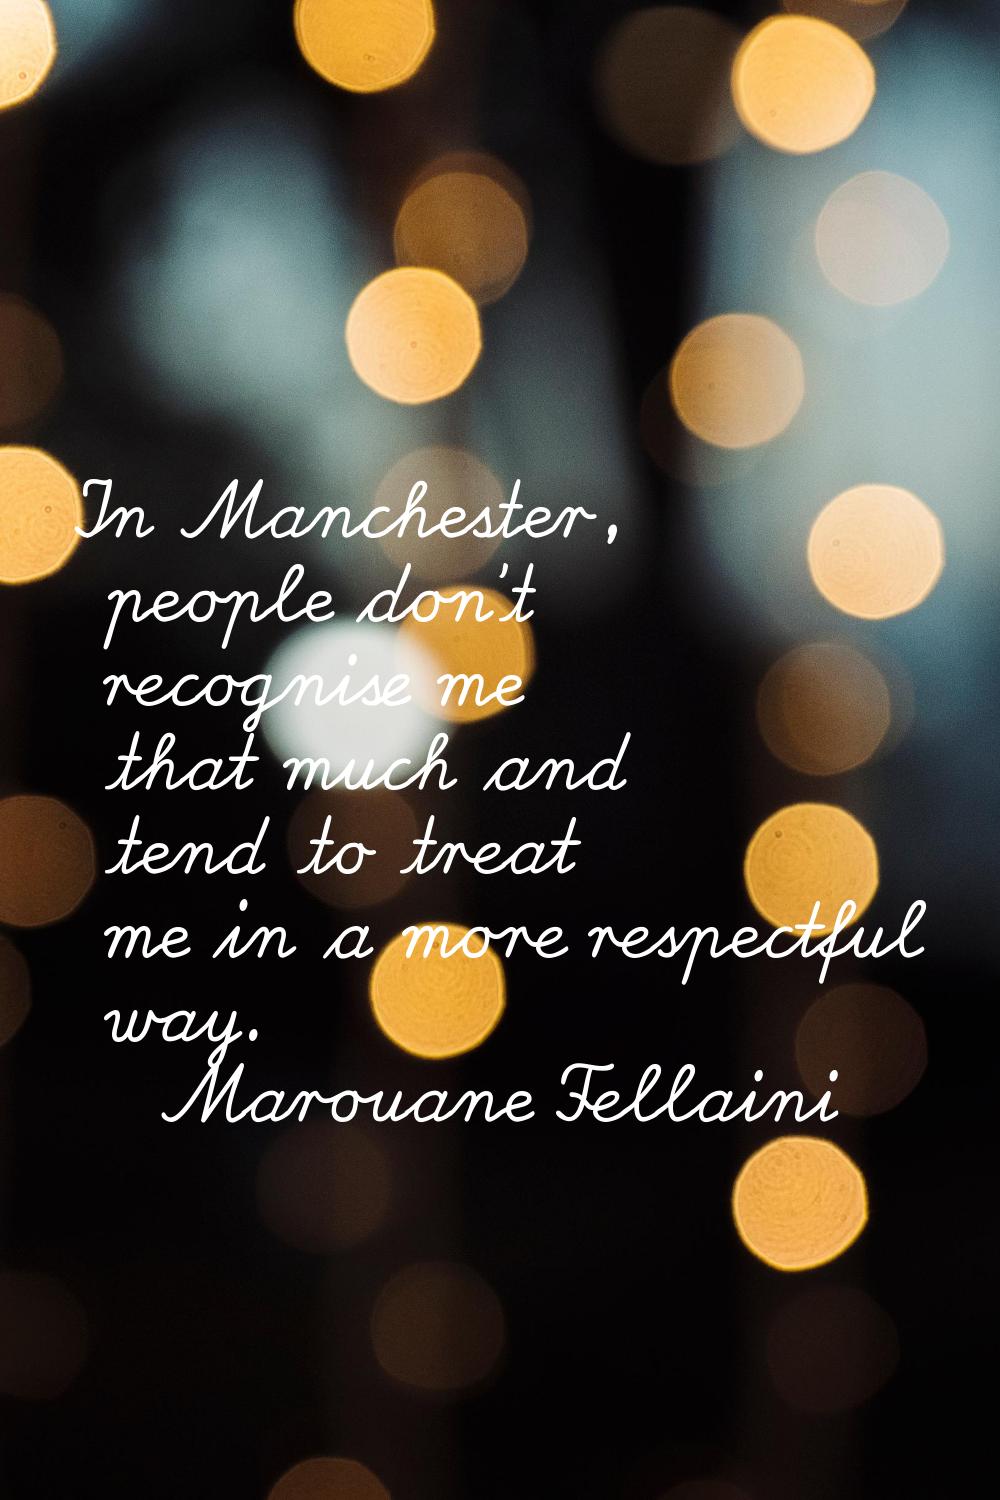 In Manchester, people don't recognise me that much and tend to treat me in a more respectful way.